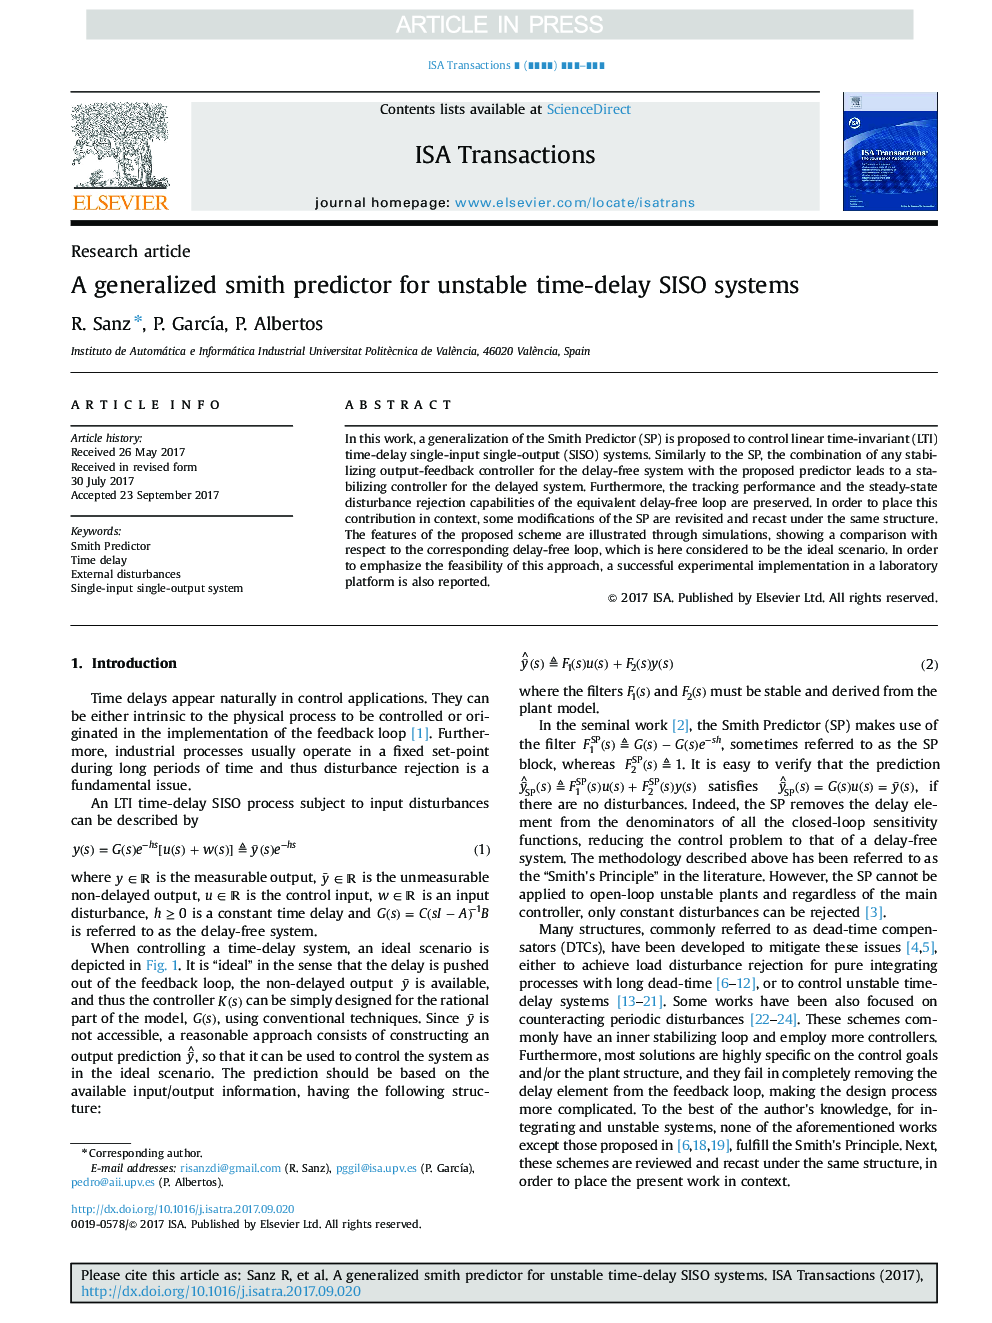 A generalized smith predictor for unstable time-delay SISO systems